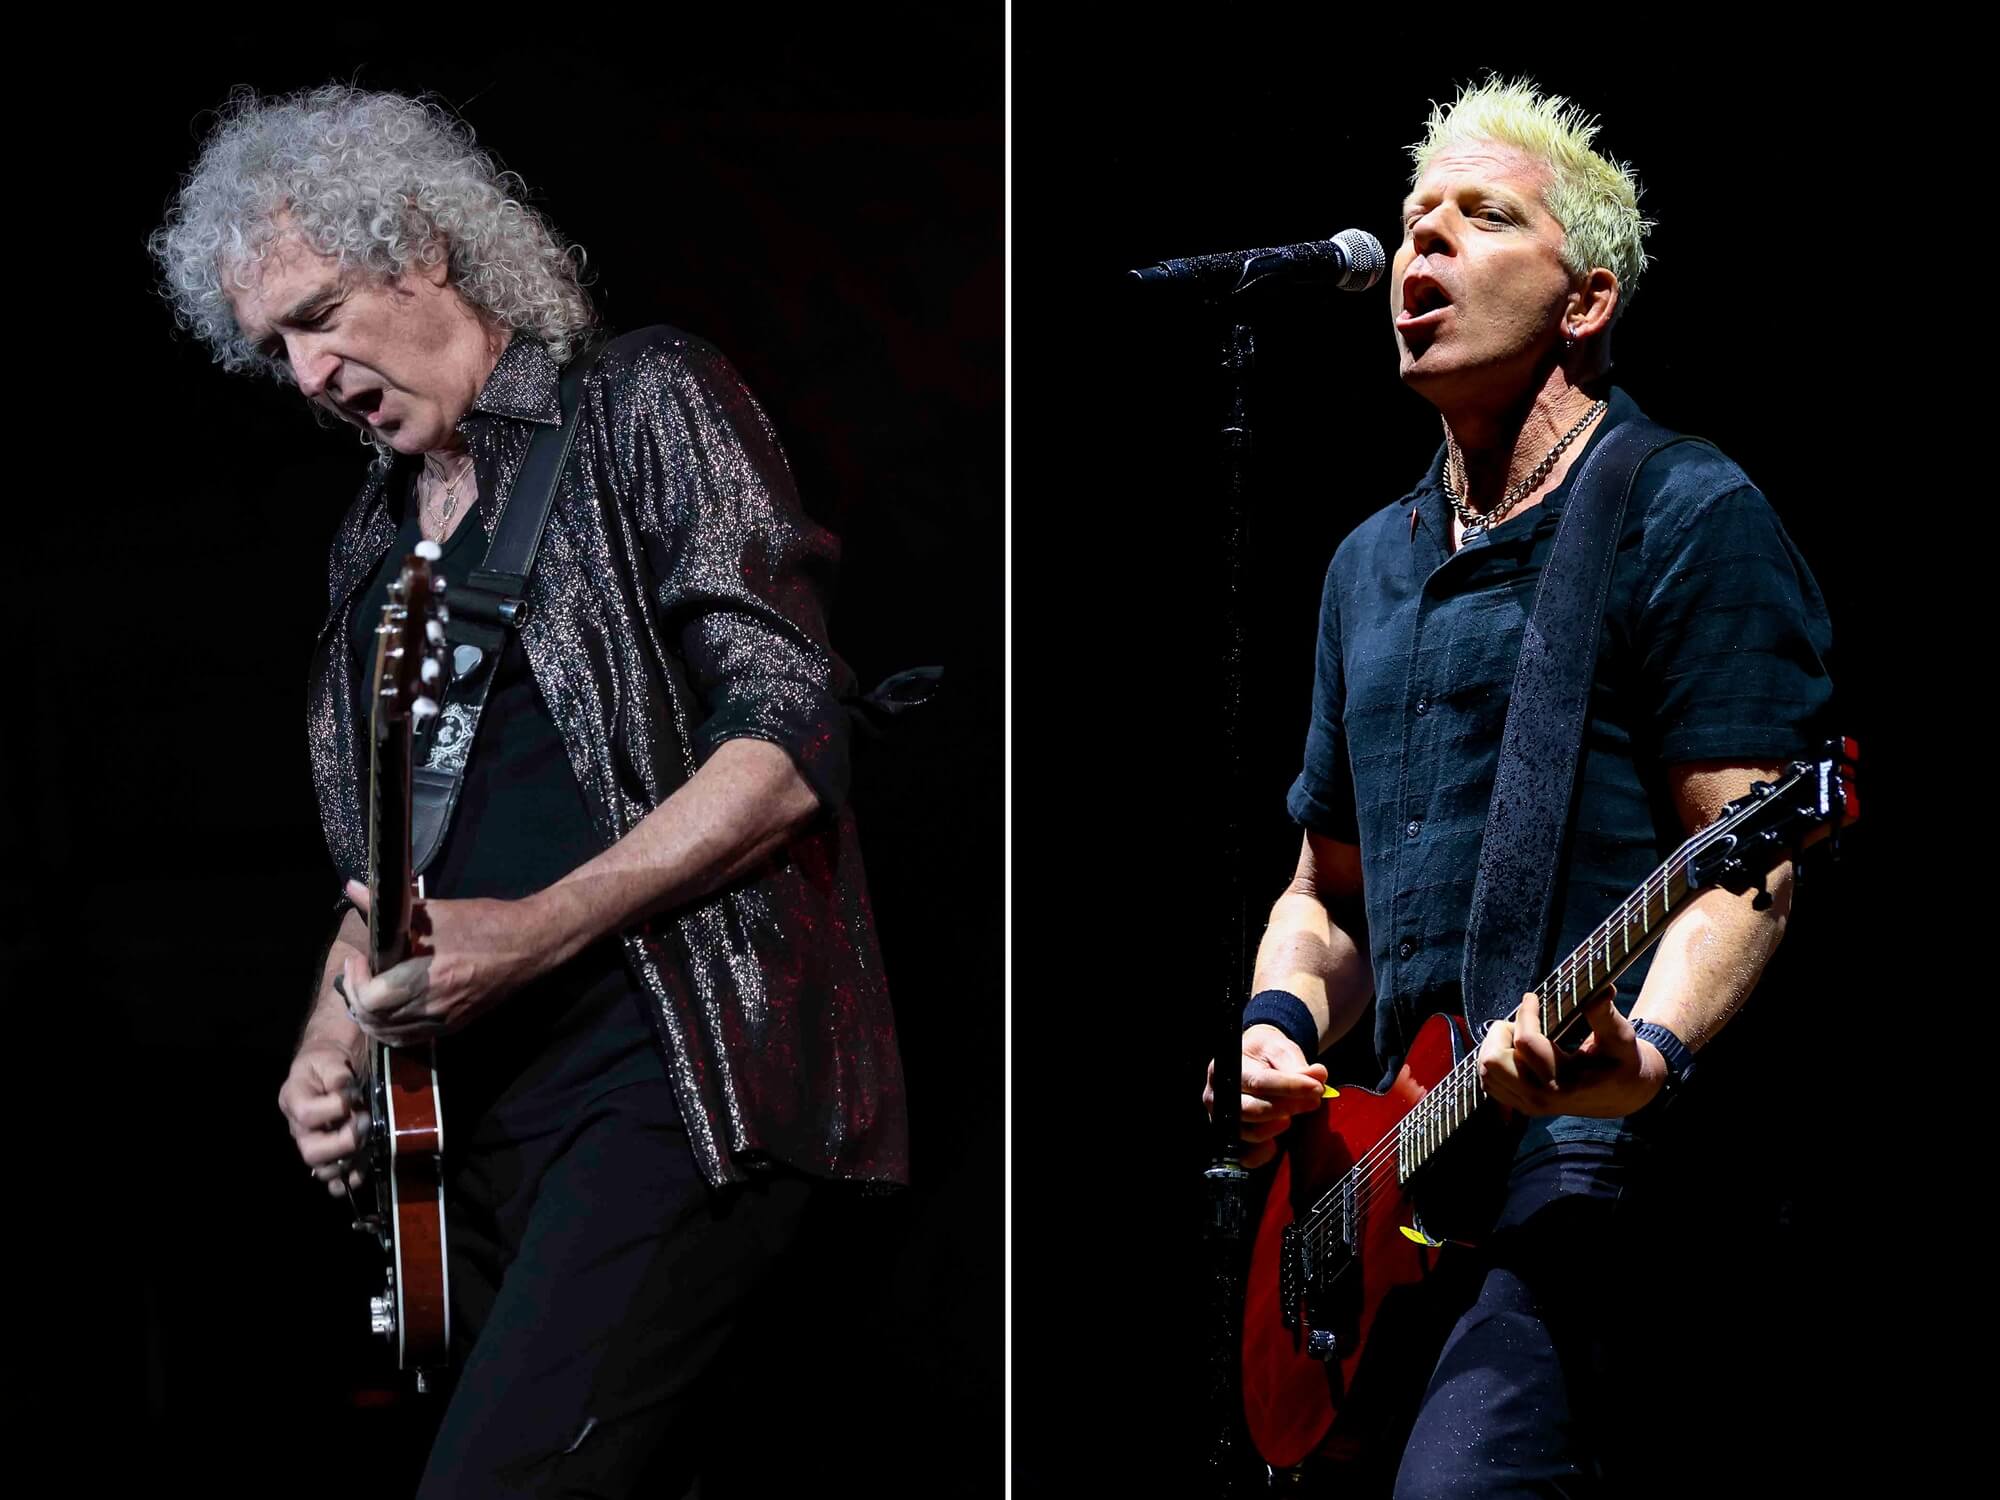 Brian May of Queen and Dexter Holland of The Offspring